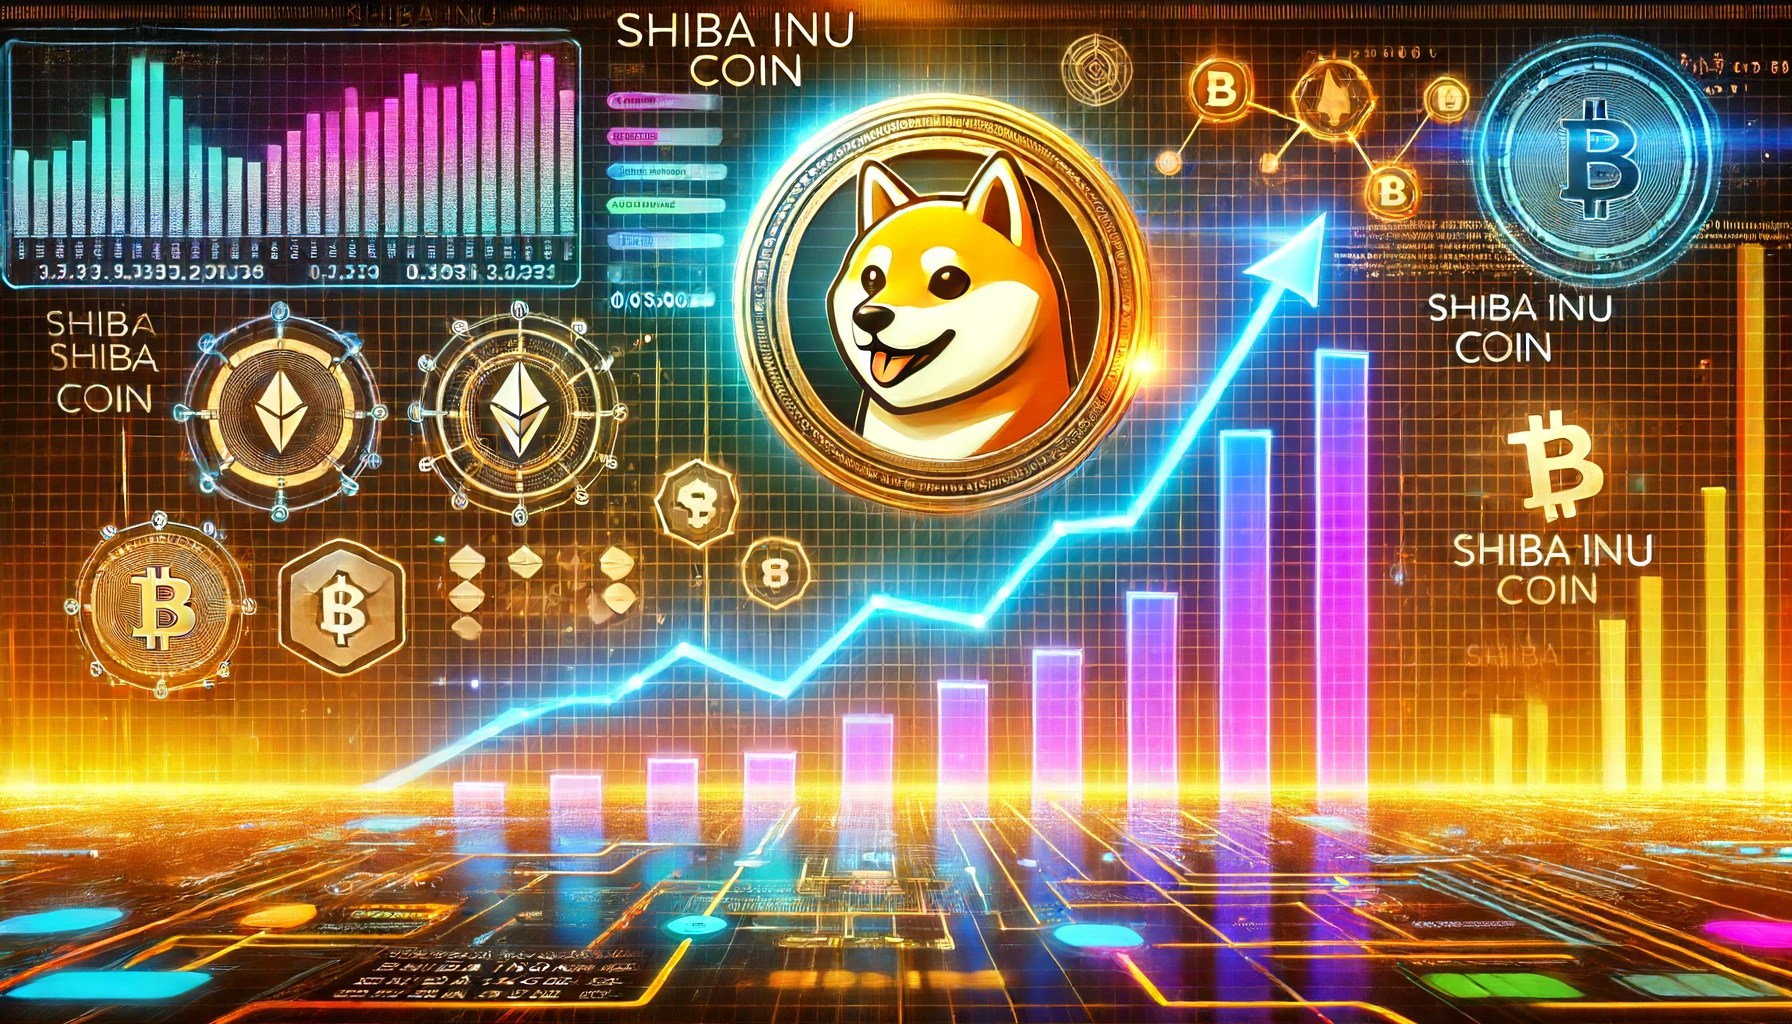 Shiba Inu Recovers From Crash, Machine Learning Algorithm Predicts Next Week’s Price